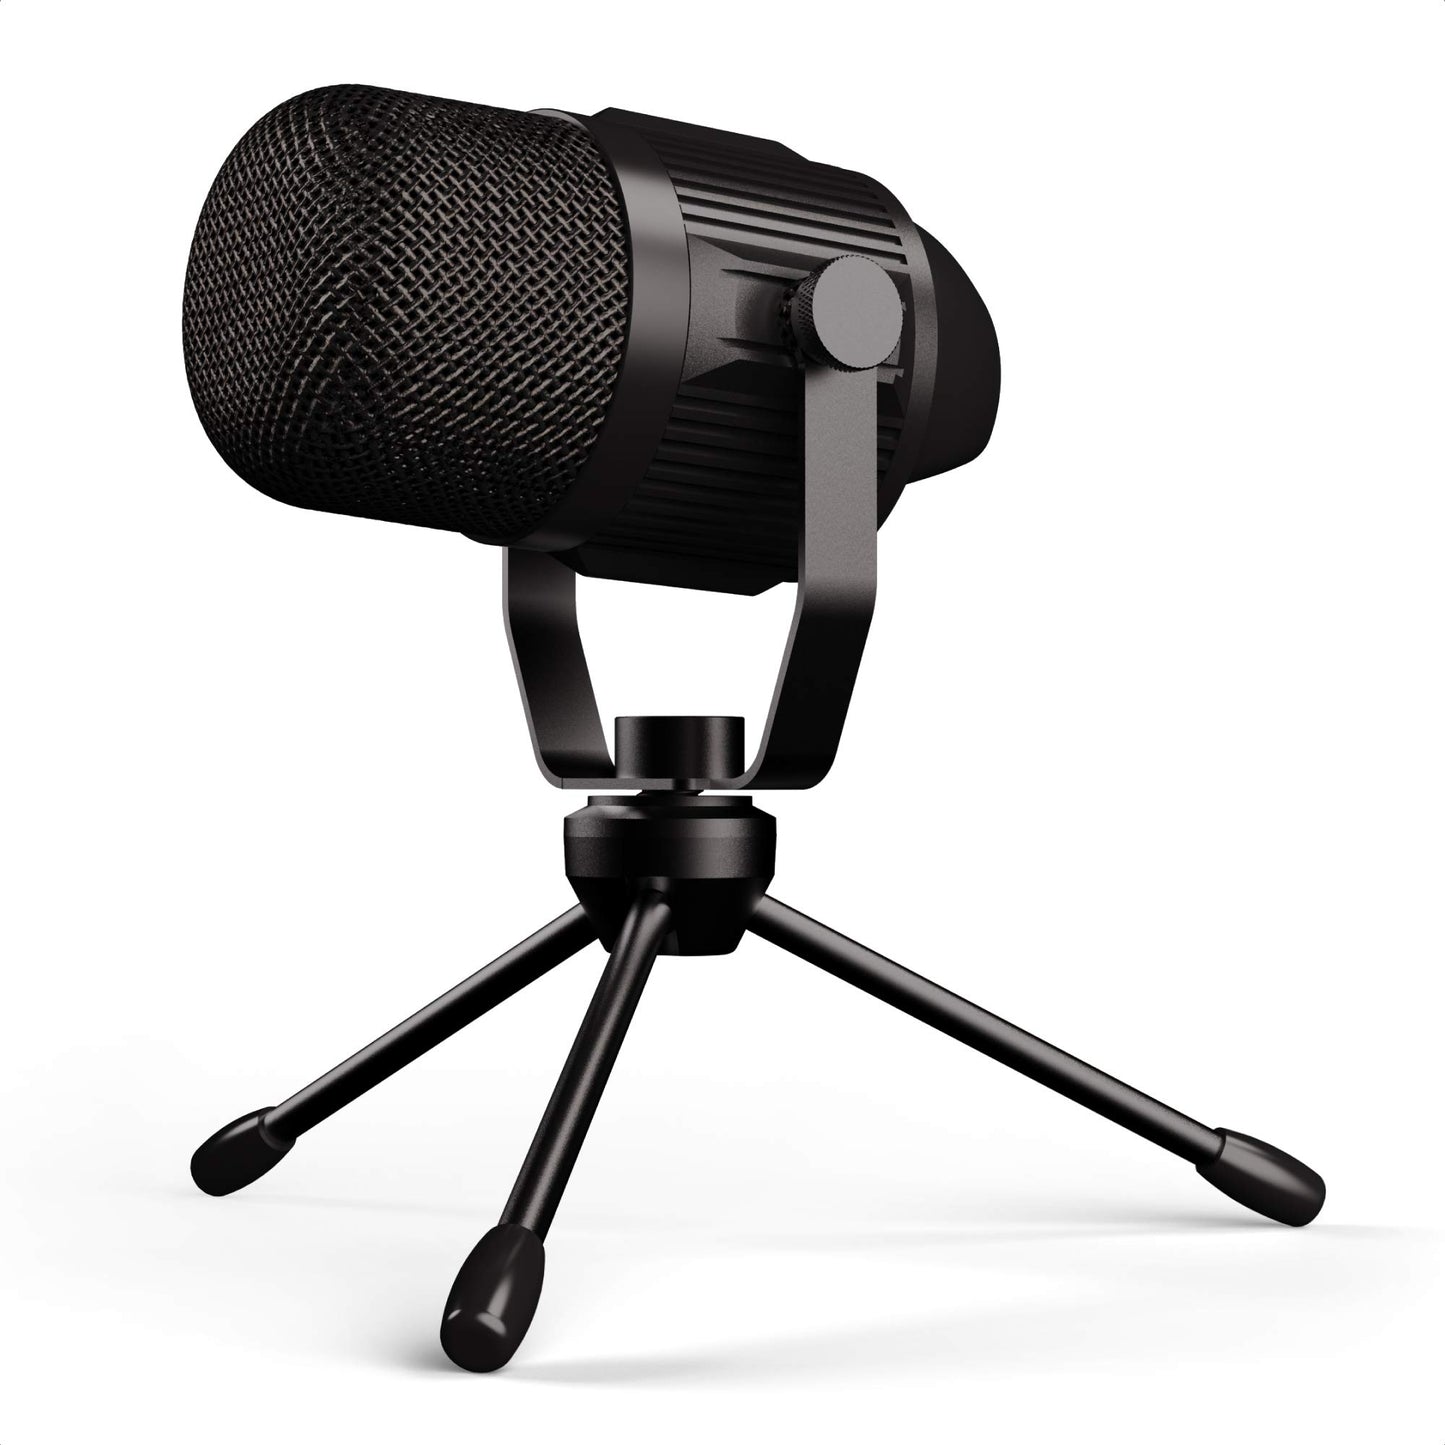 Refurbished Majority RS1 Gaming Microphone Condenser Microphone with Stand